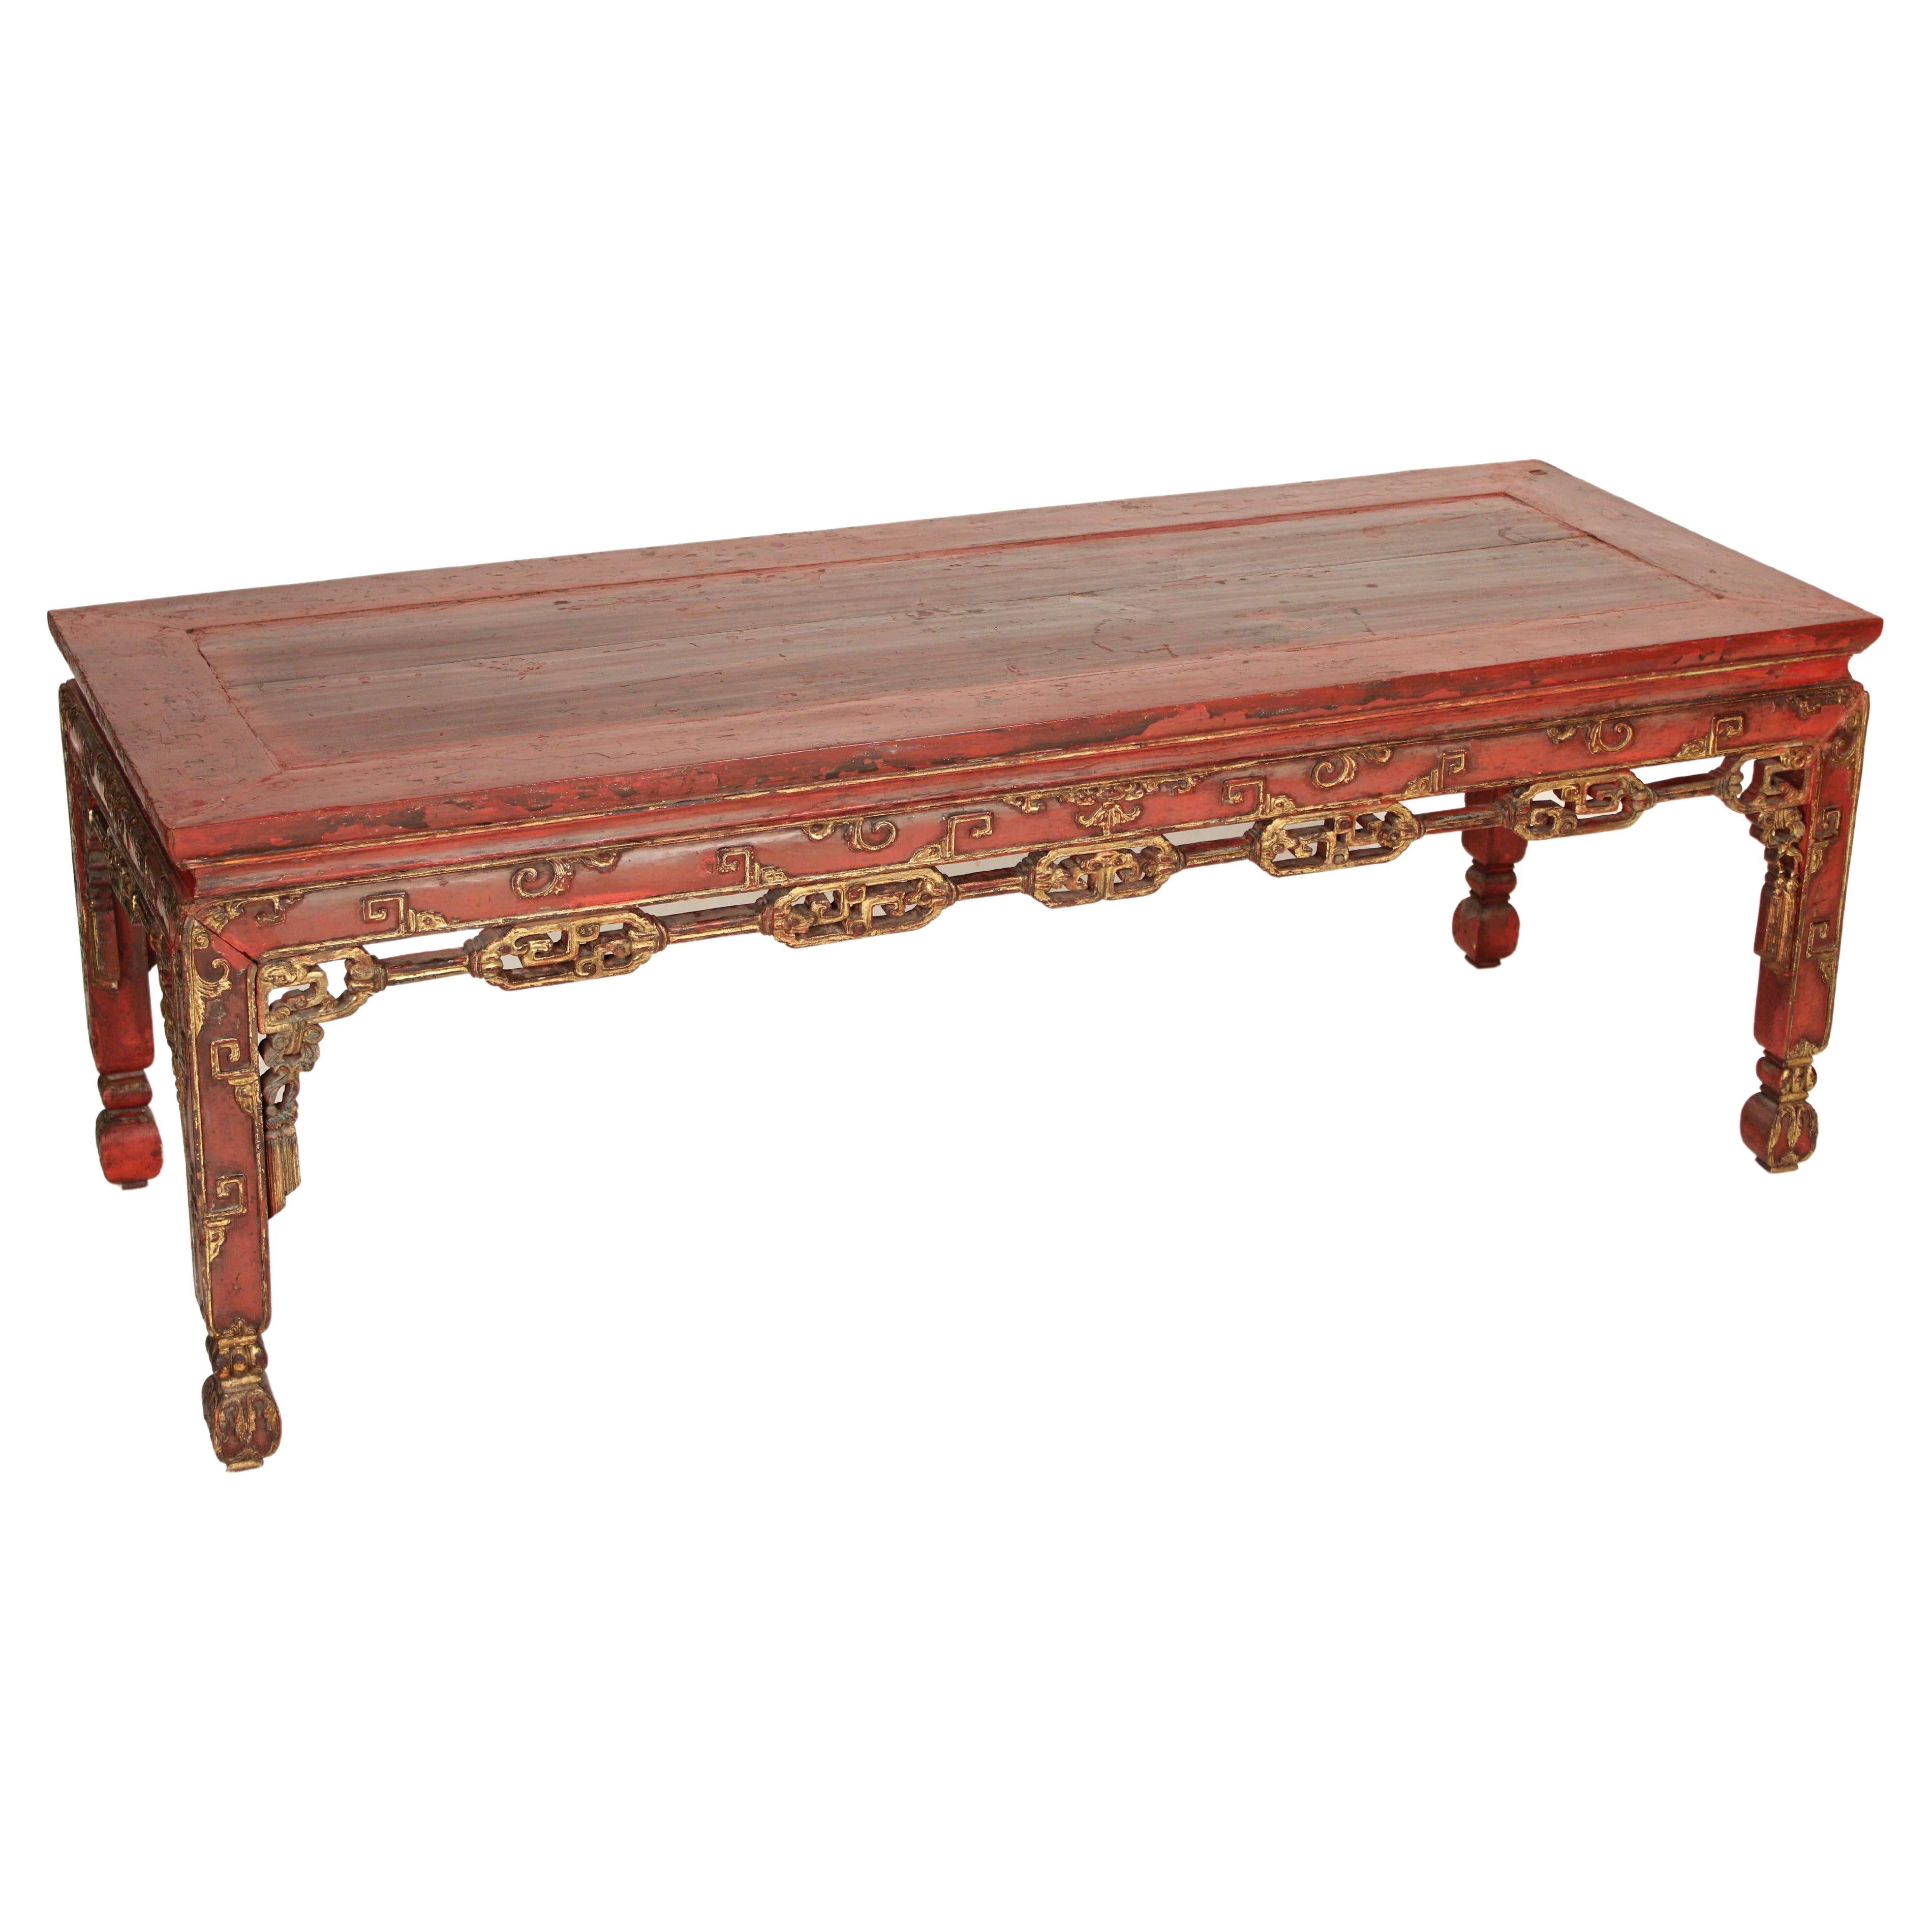 Chinese Red Painted and Gilt Decorated Coffee Table